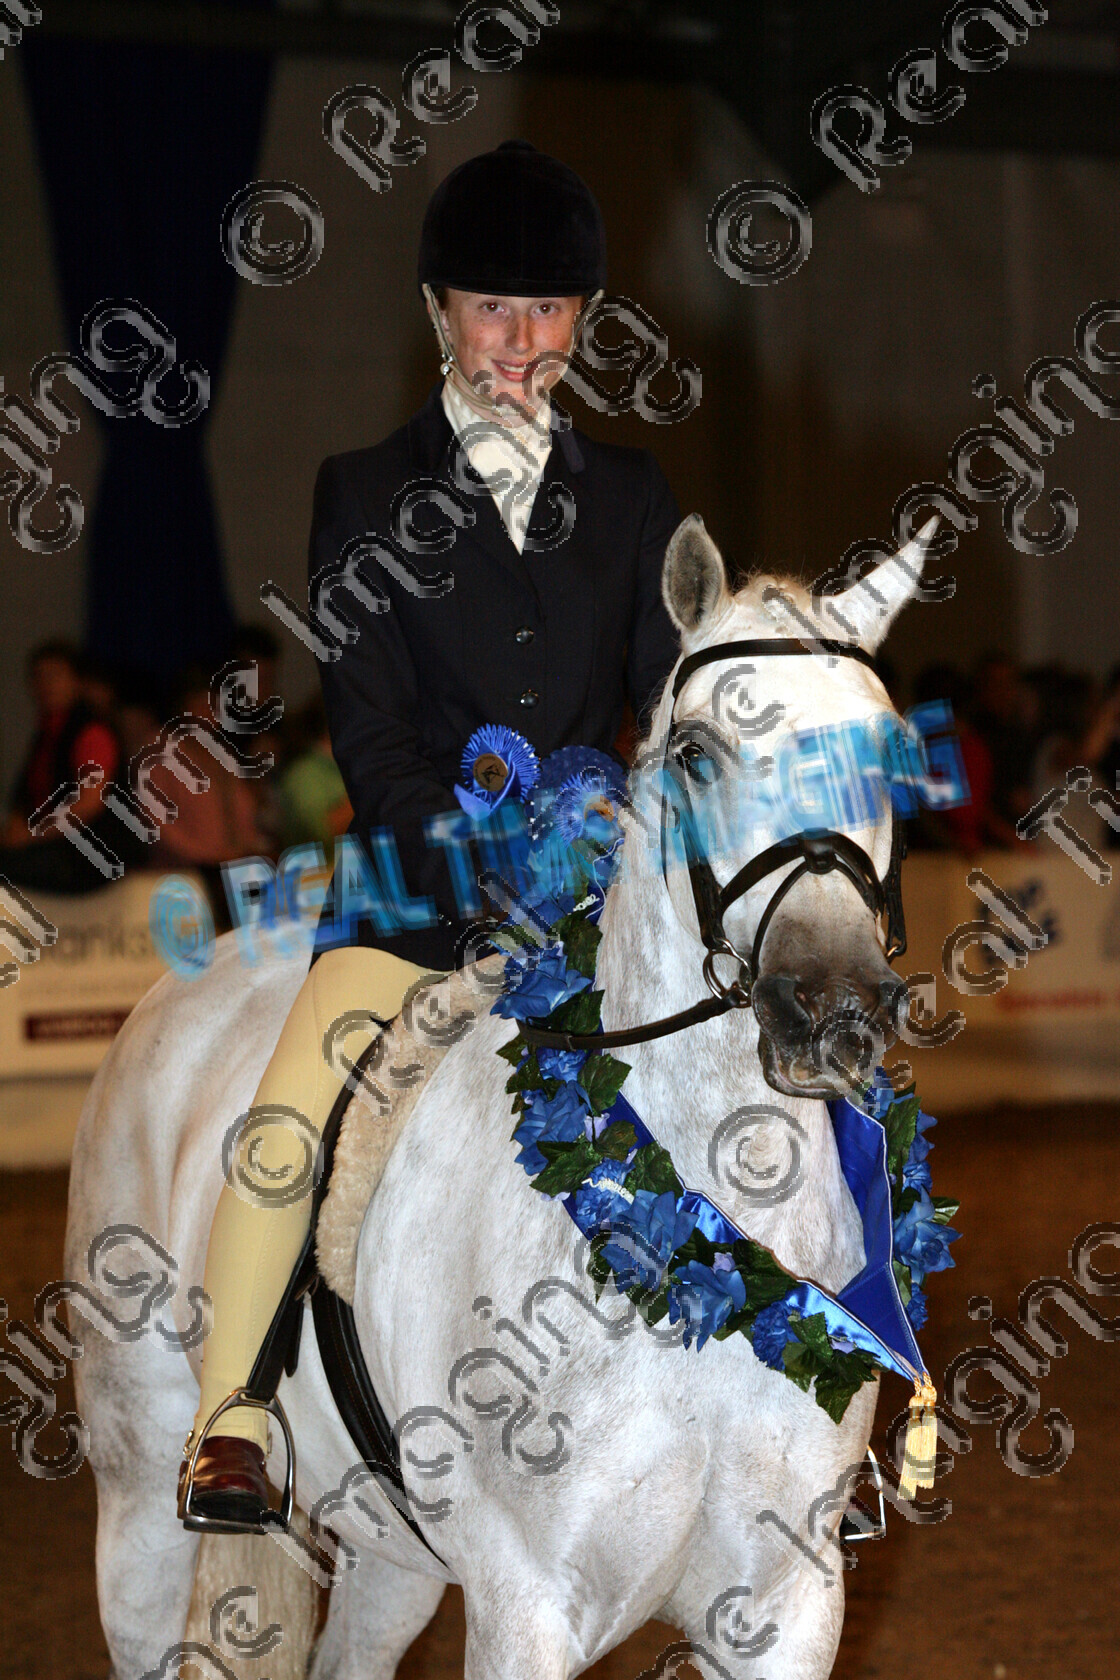 S06-54-13-198 
 Keywords: BSPS Summer Championships Show British Show Pony Society Dapple grey gray THE BSPS "COOPER CORPORATION" DESERT ORCHID BLUE RIBAND WHP OF THE YEAR CHAMPIONSHIP
CHAMPION  HANKEY PANKEY presentation standing sash rosette rosettes